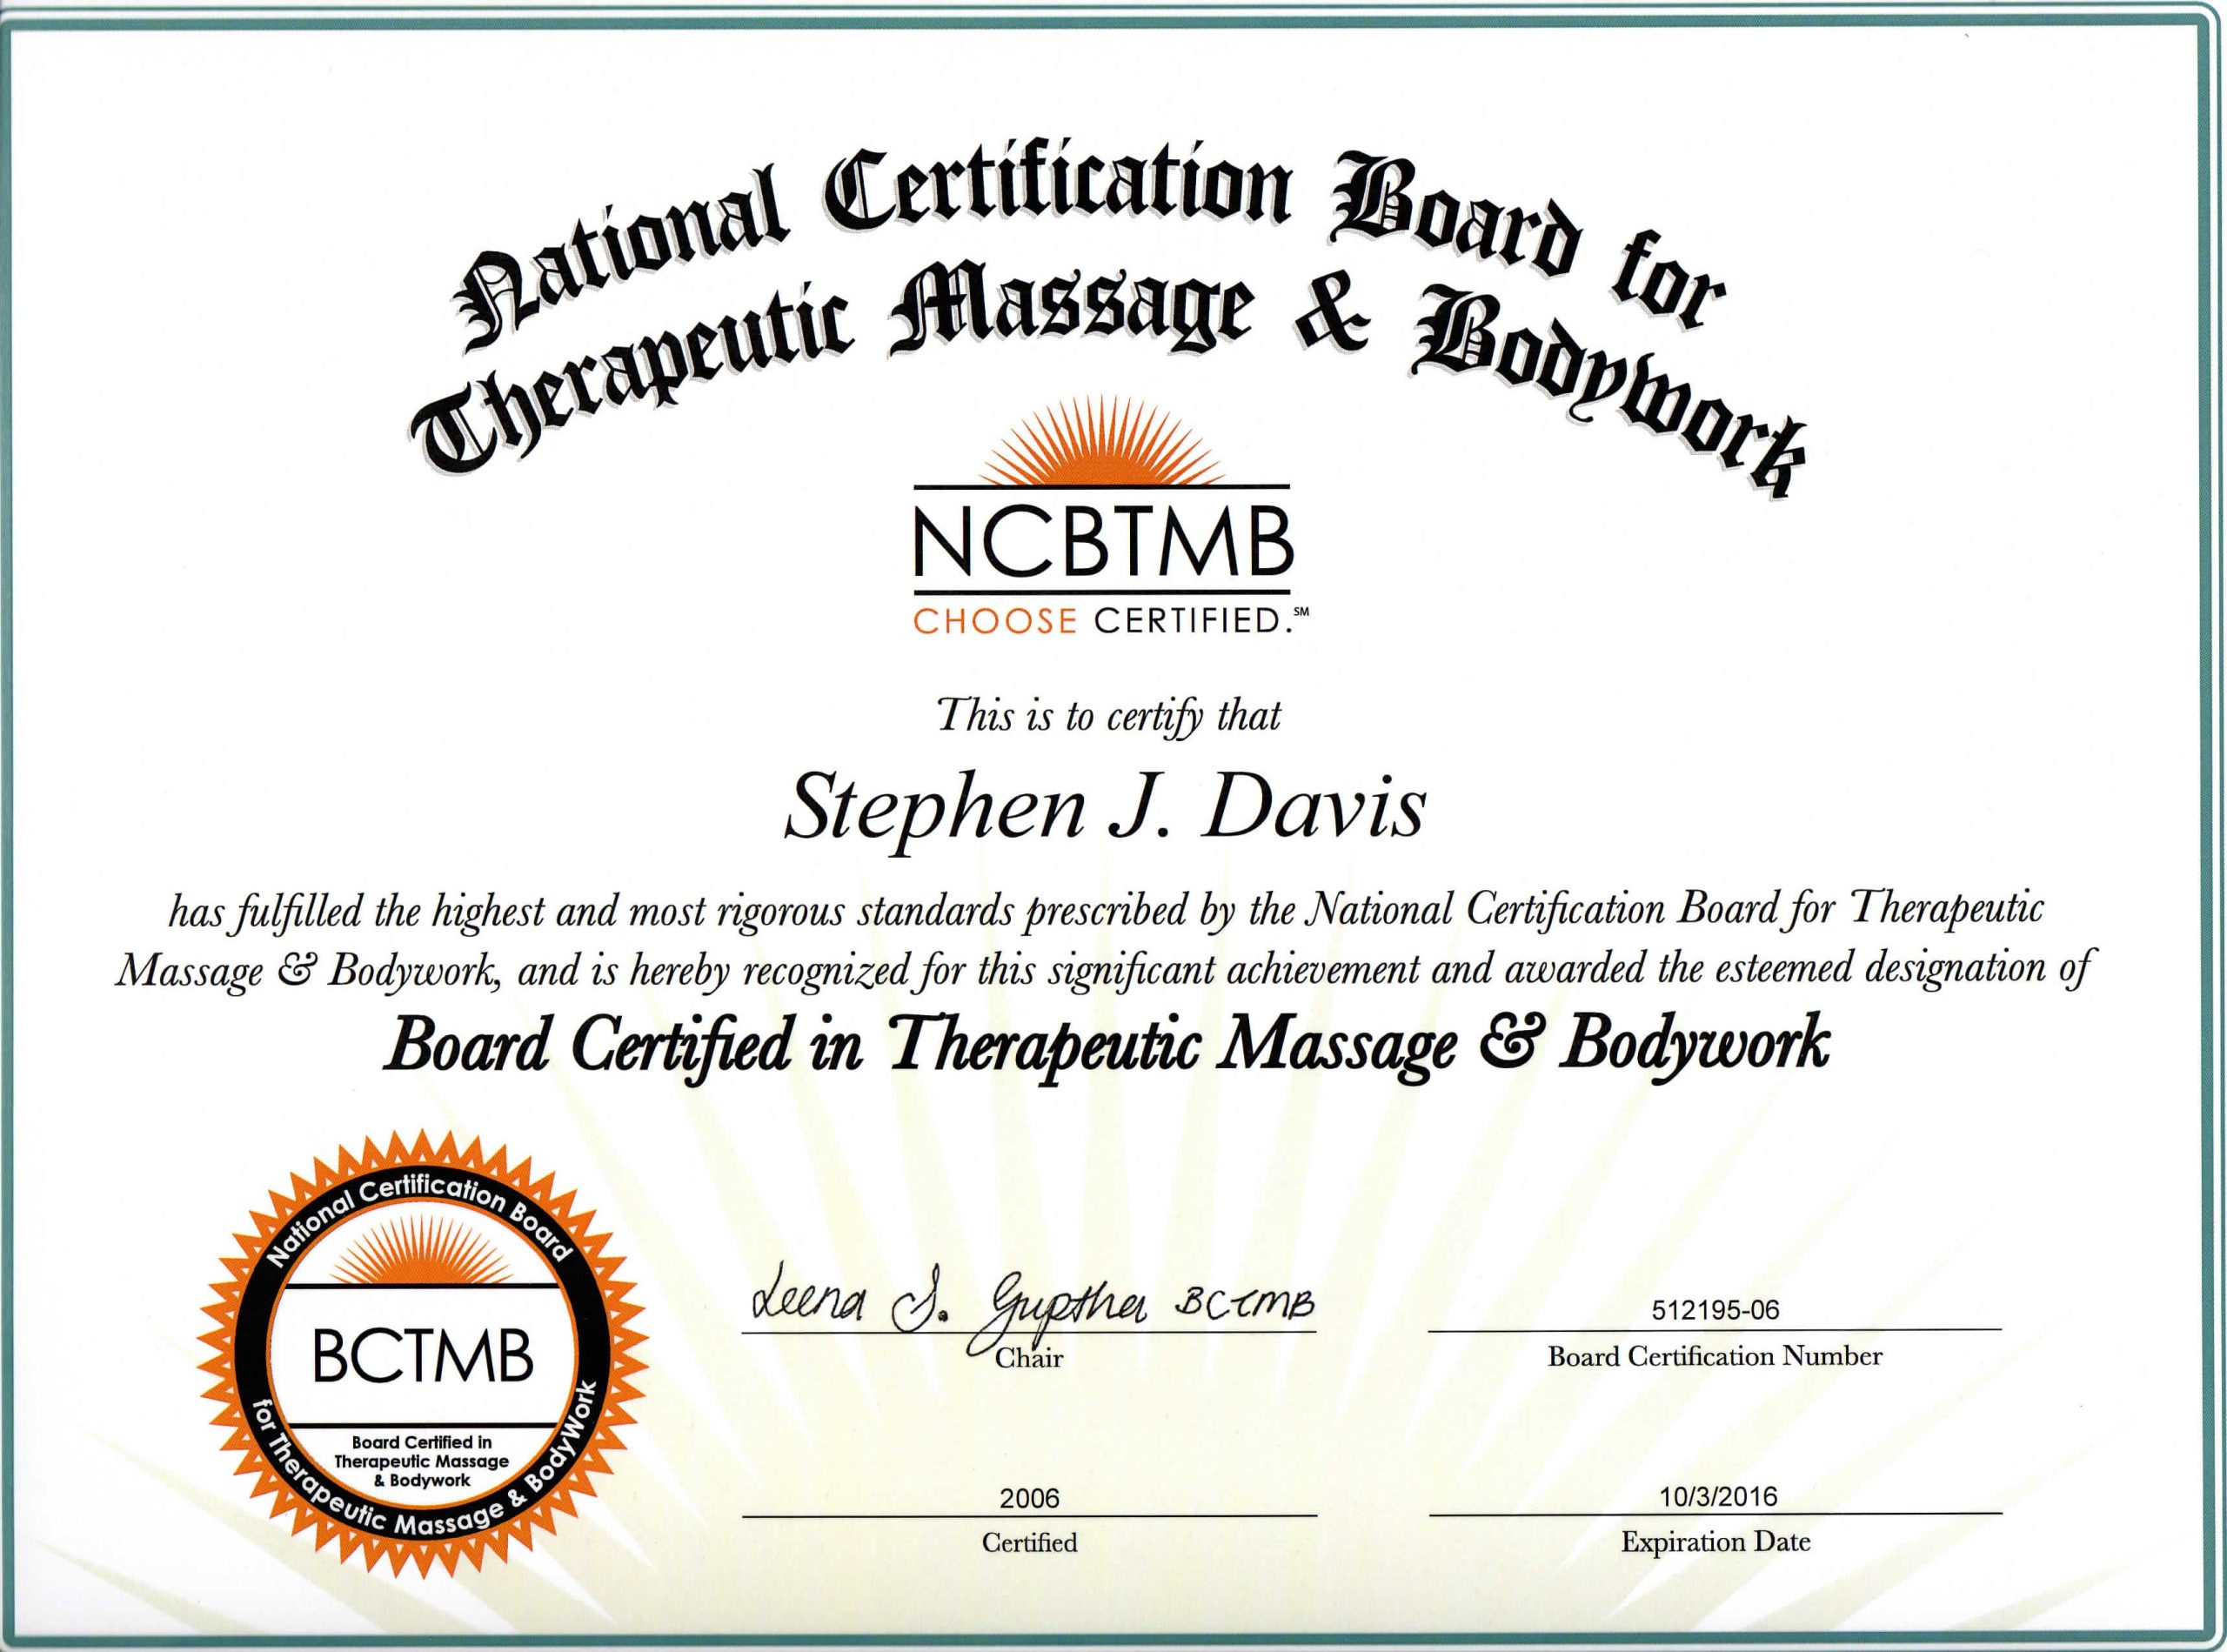 Steve Davis, Board Certified, Therapeutic Massage and Bodywork, BCTMB 512195-06 Valid 2006 to 2024